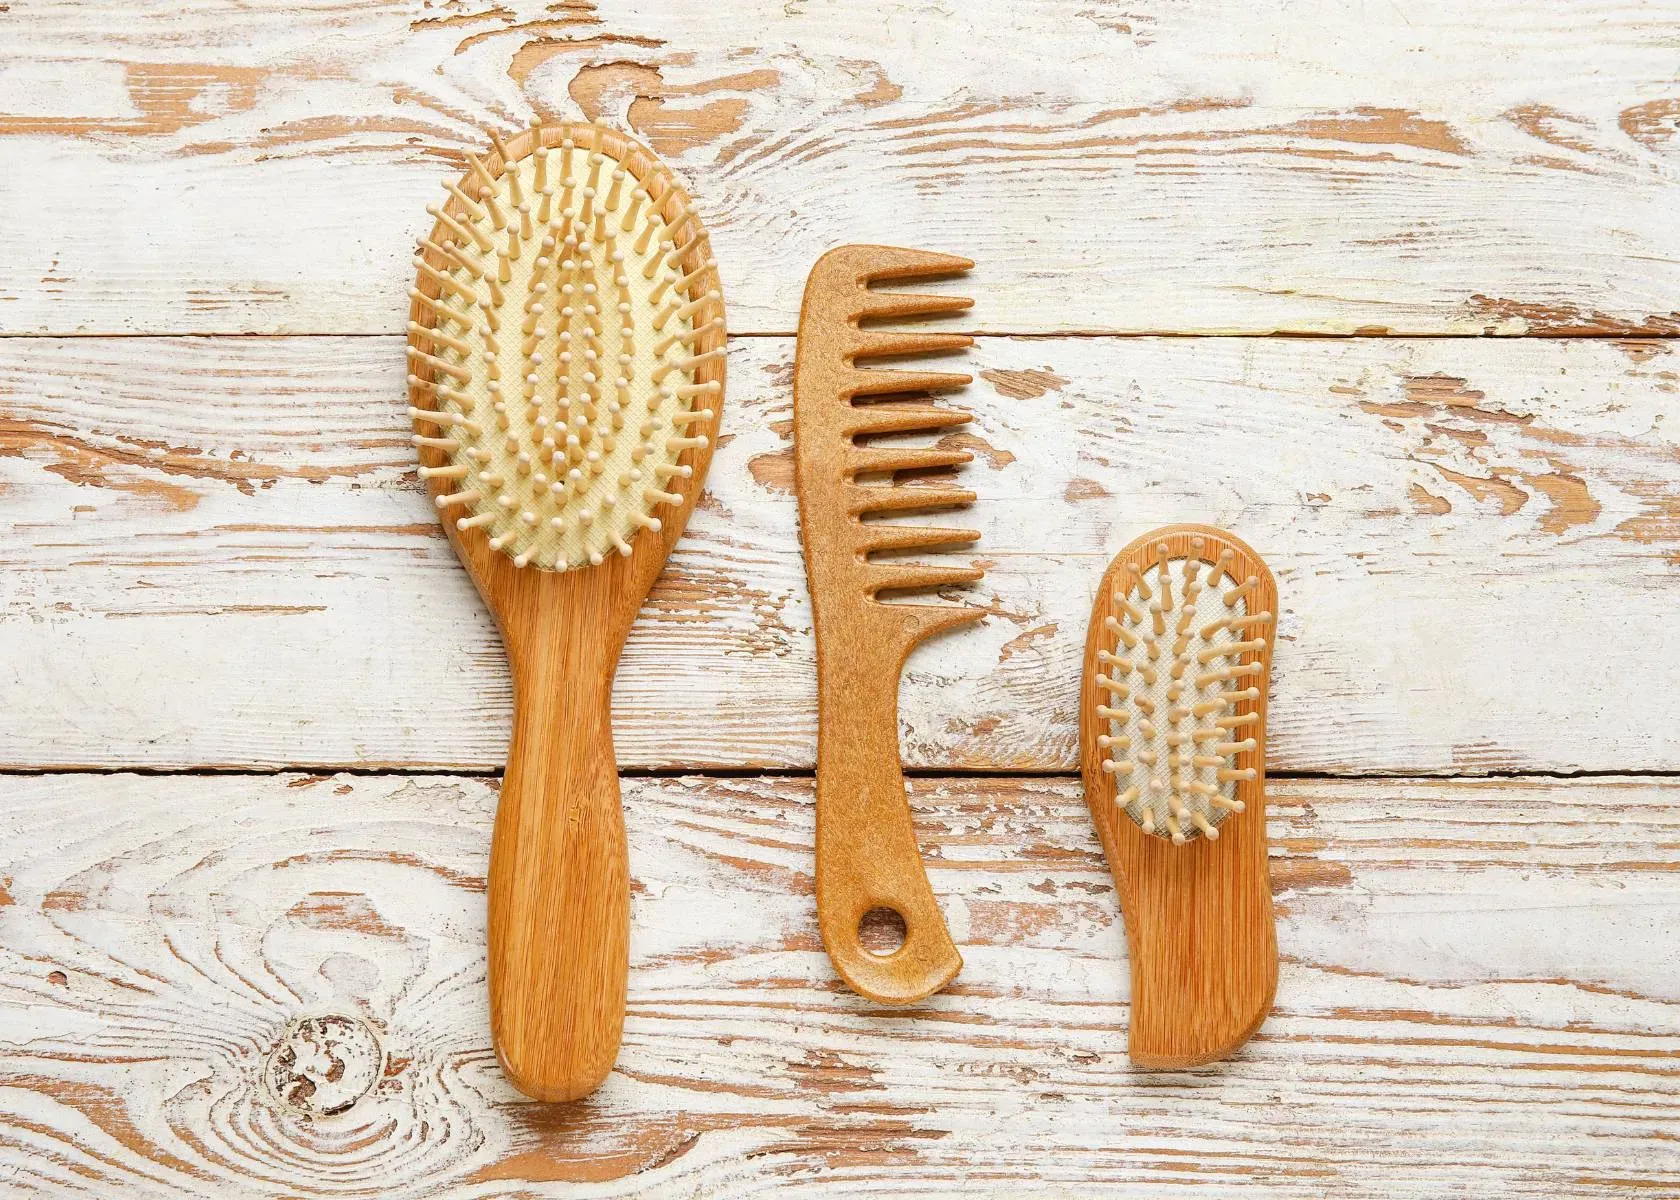 Factors to Consider When Buying a Wooden Hair Brush